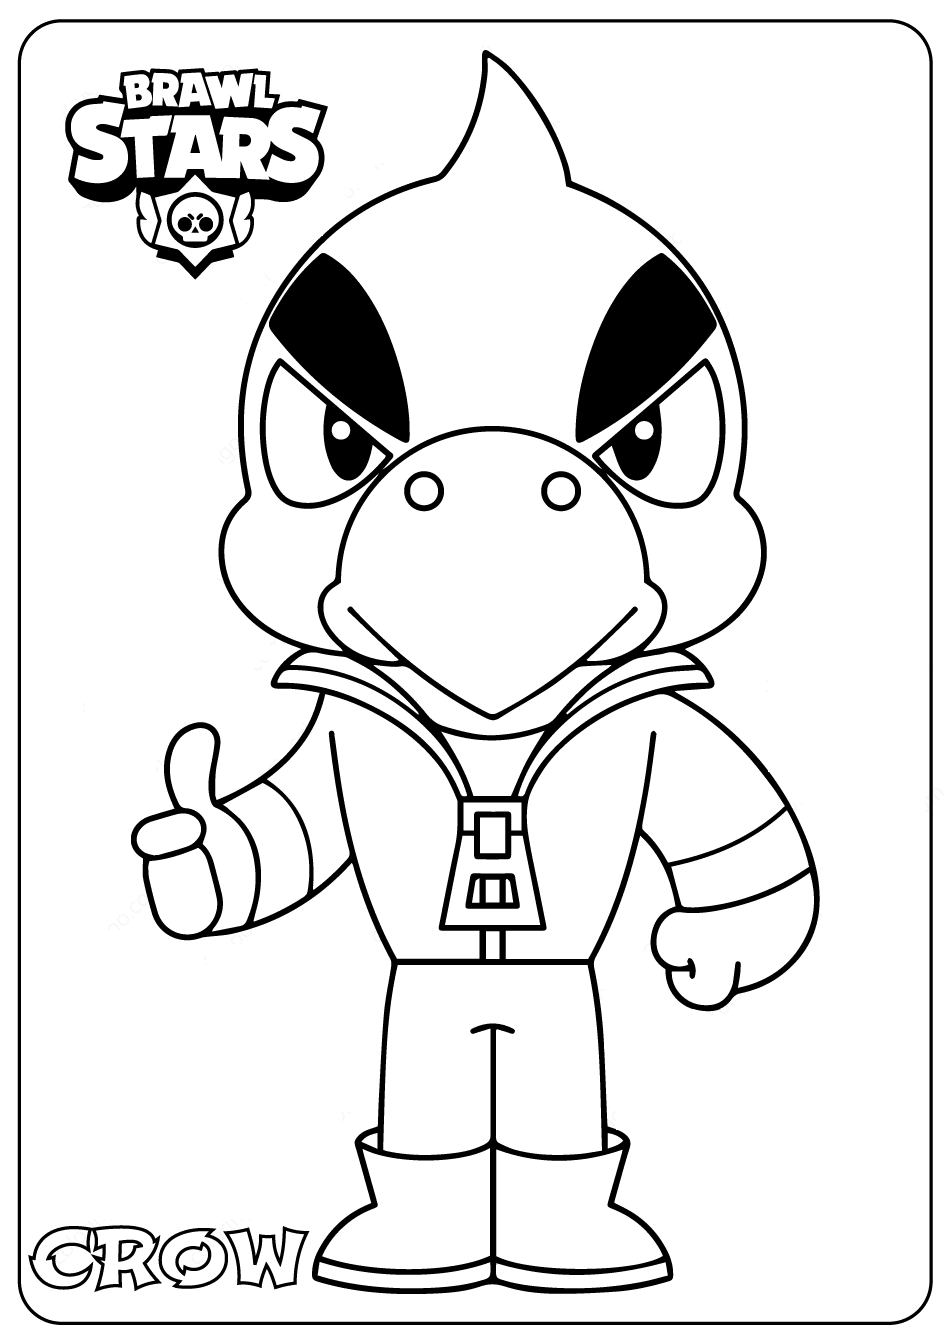 Crow From Brawl Stars Fires A Trio Of Poisoned Daggers Coloring Pages Brawl Stars Coloring Pages Coloring Pages For Kids And Adults - brawl stars barley fire